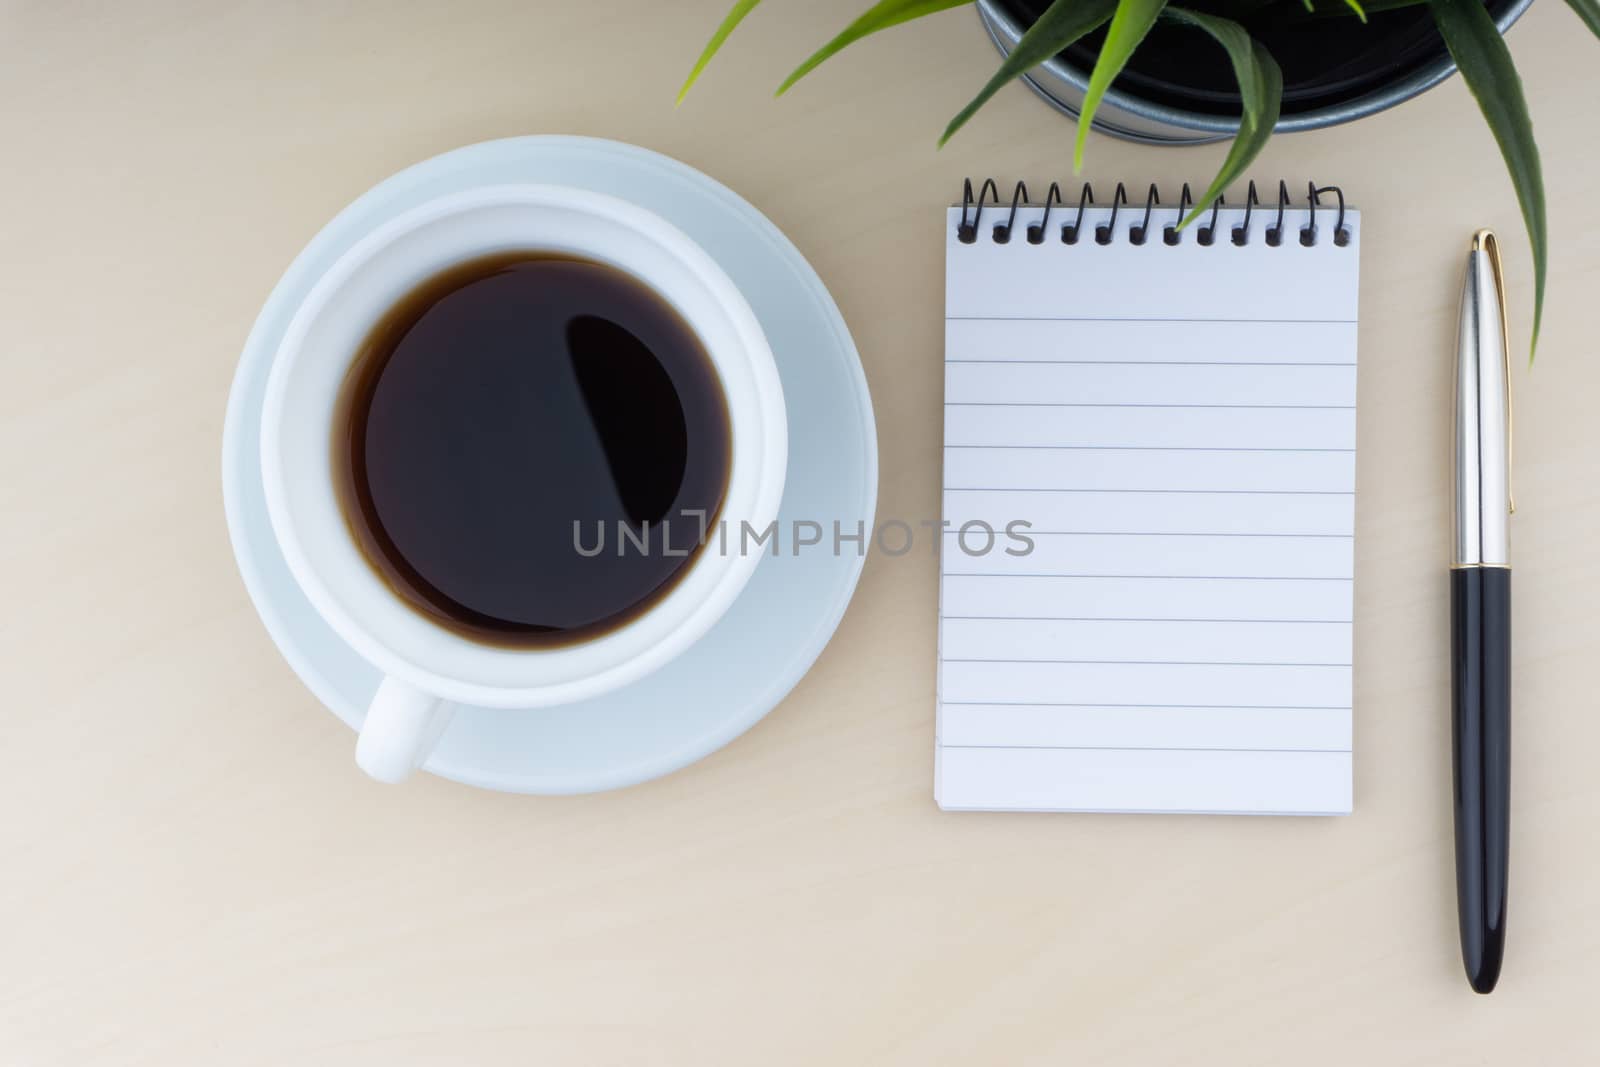 Fountain pen, decorative plant, notepad and cup of coffee on wooden background. Business and copy space concept.
